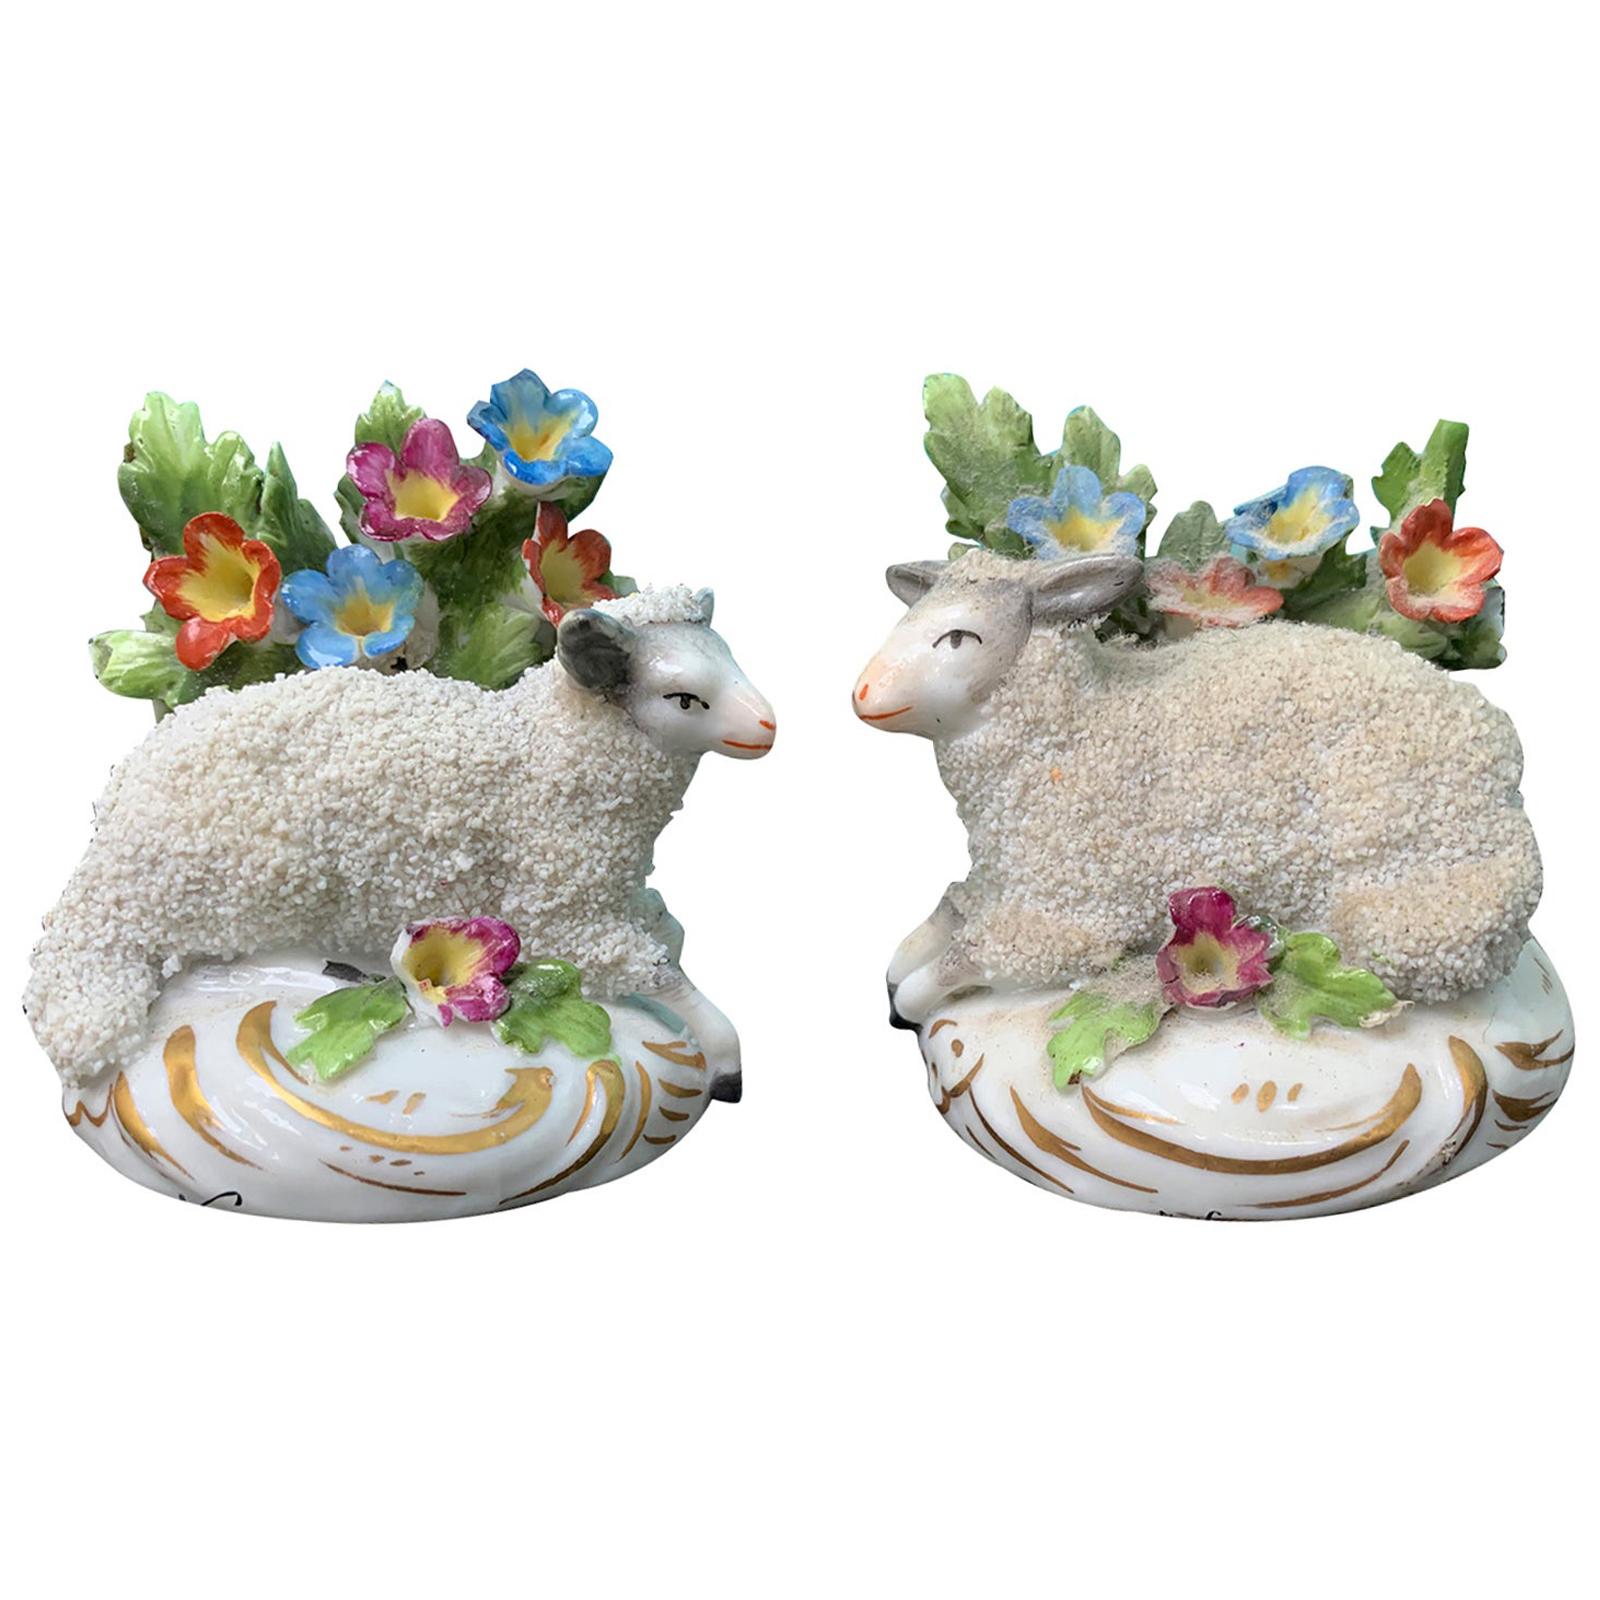 Pair of circa 1880s French Chelsea Style Porcelain Lambs by Edme Samson, Marked